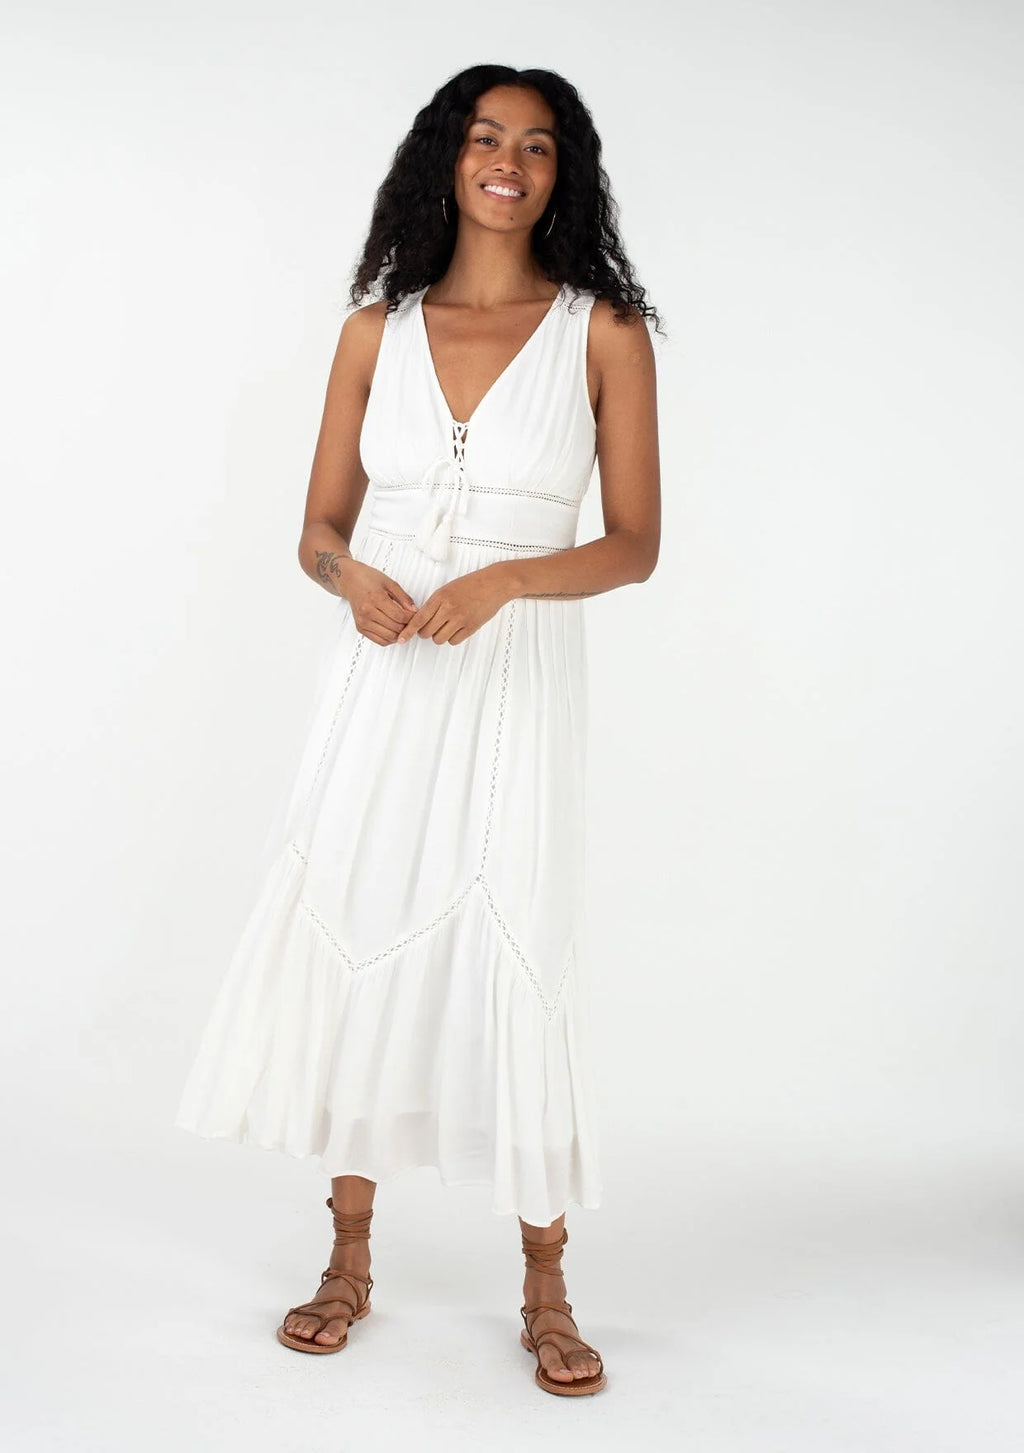  sleeveless bohemian style v-neckline maxi dress with pintuck details and a lace-up front in vanilla